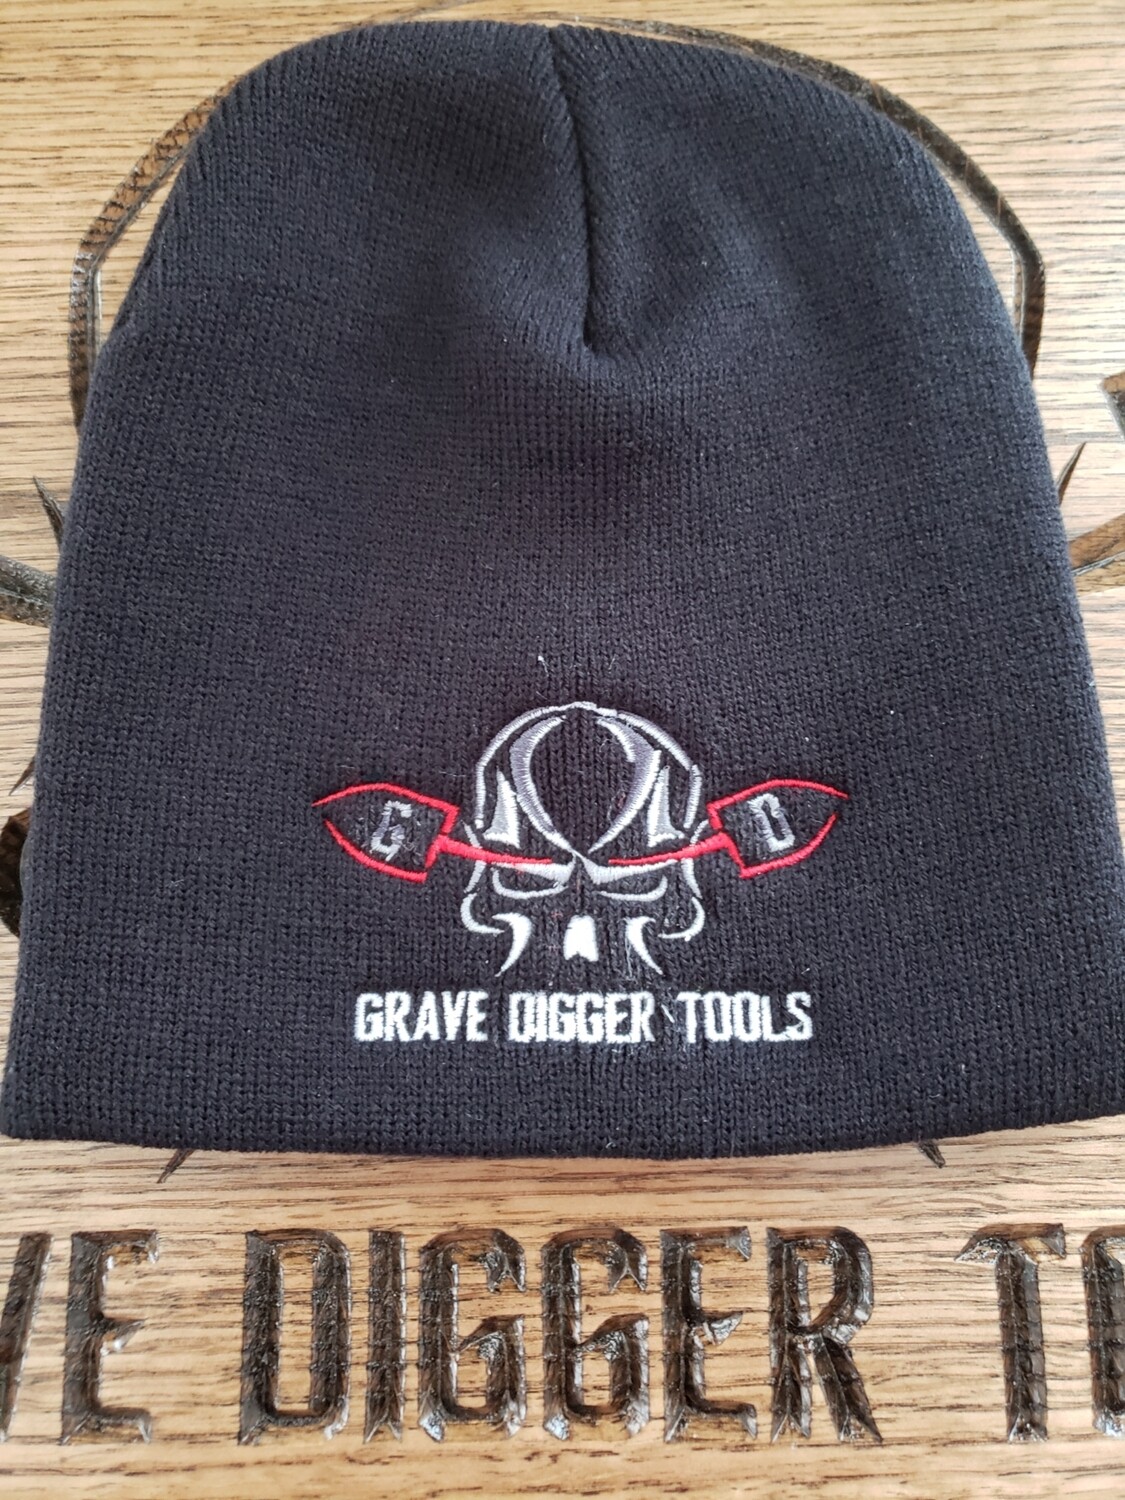 Grave Digger Tools Beanie Hats